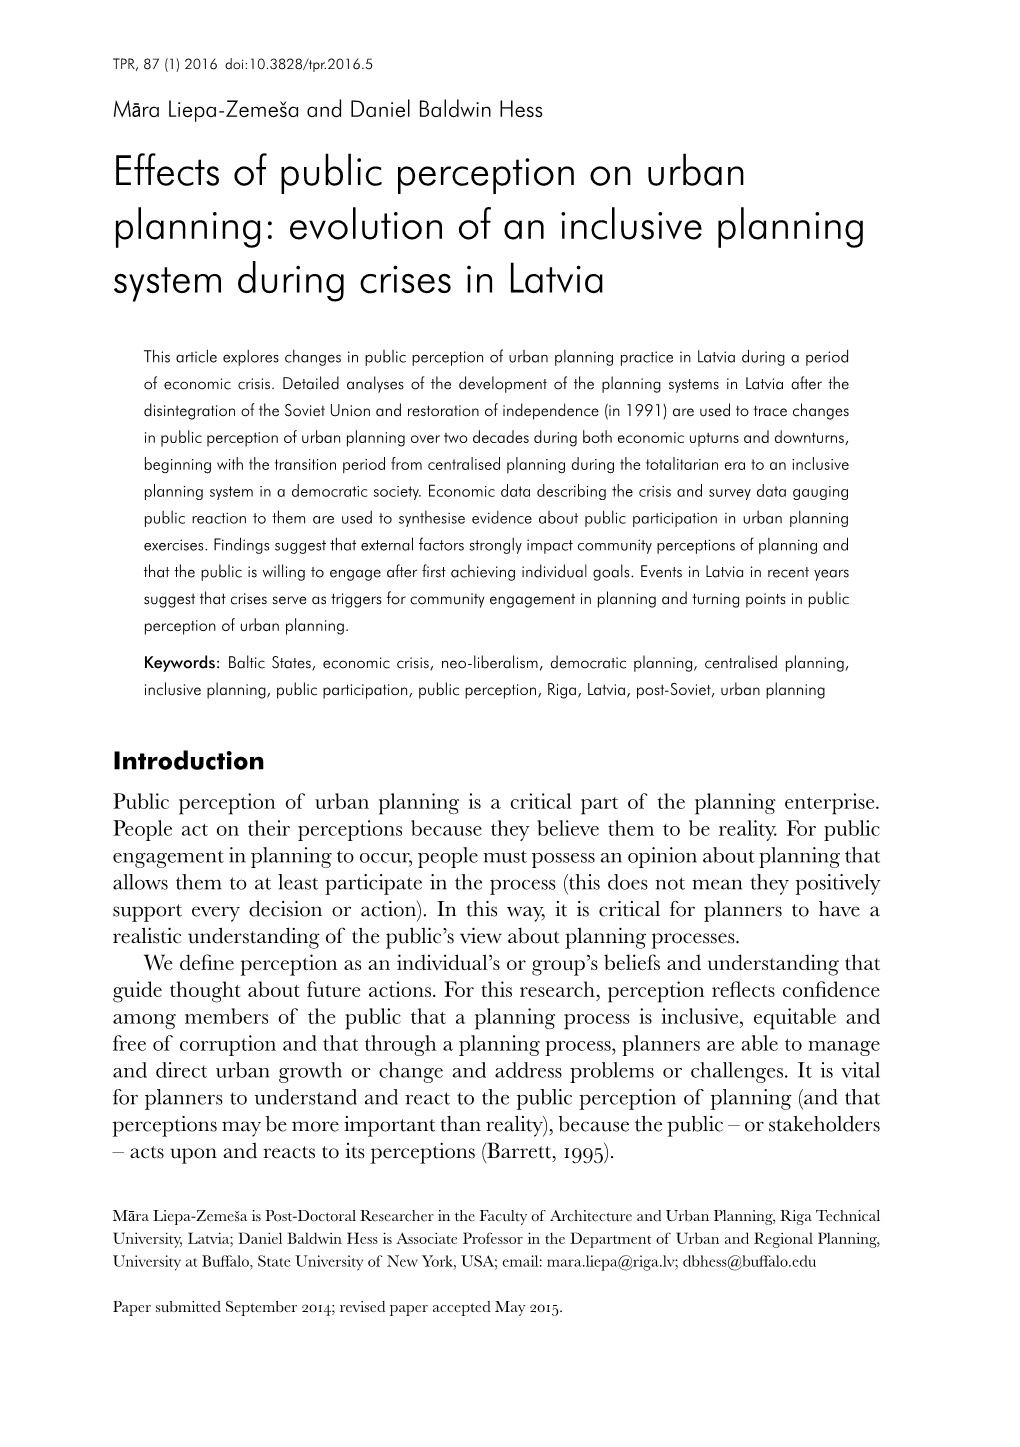 Effects of Public Perception on Urban Planning: Evolution of an Inclusive Planning System During Crises in Latvia